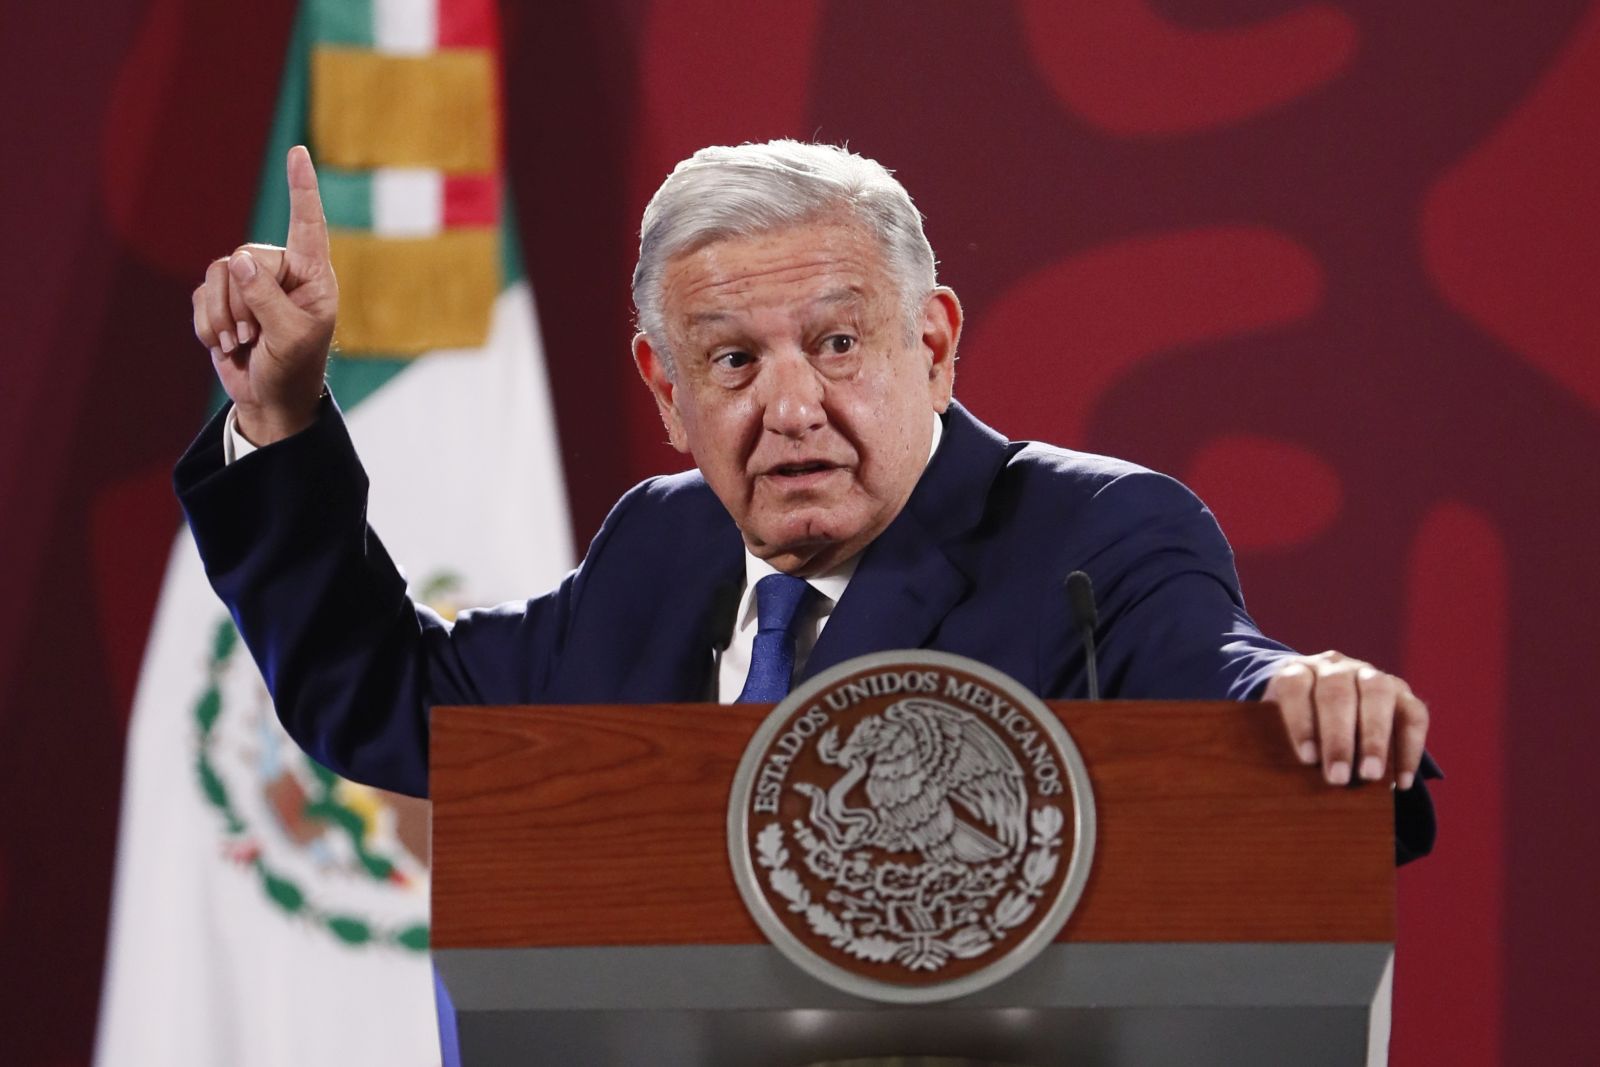 epa10181621 The President of Mexico Andres Manuel Lopez Obrador participates during his morning conference, at the National Palace, in Mexico City, Mexico 13 September 2022. Lopez Obrador spoke about the meeting he held 12 September with the US Secretary of State, Antony Blinken and the US Secretary of Commerce Gina Raimondo.  EPA/Jose Mendez